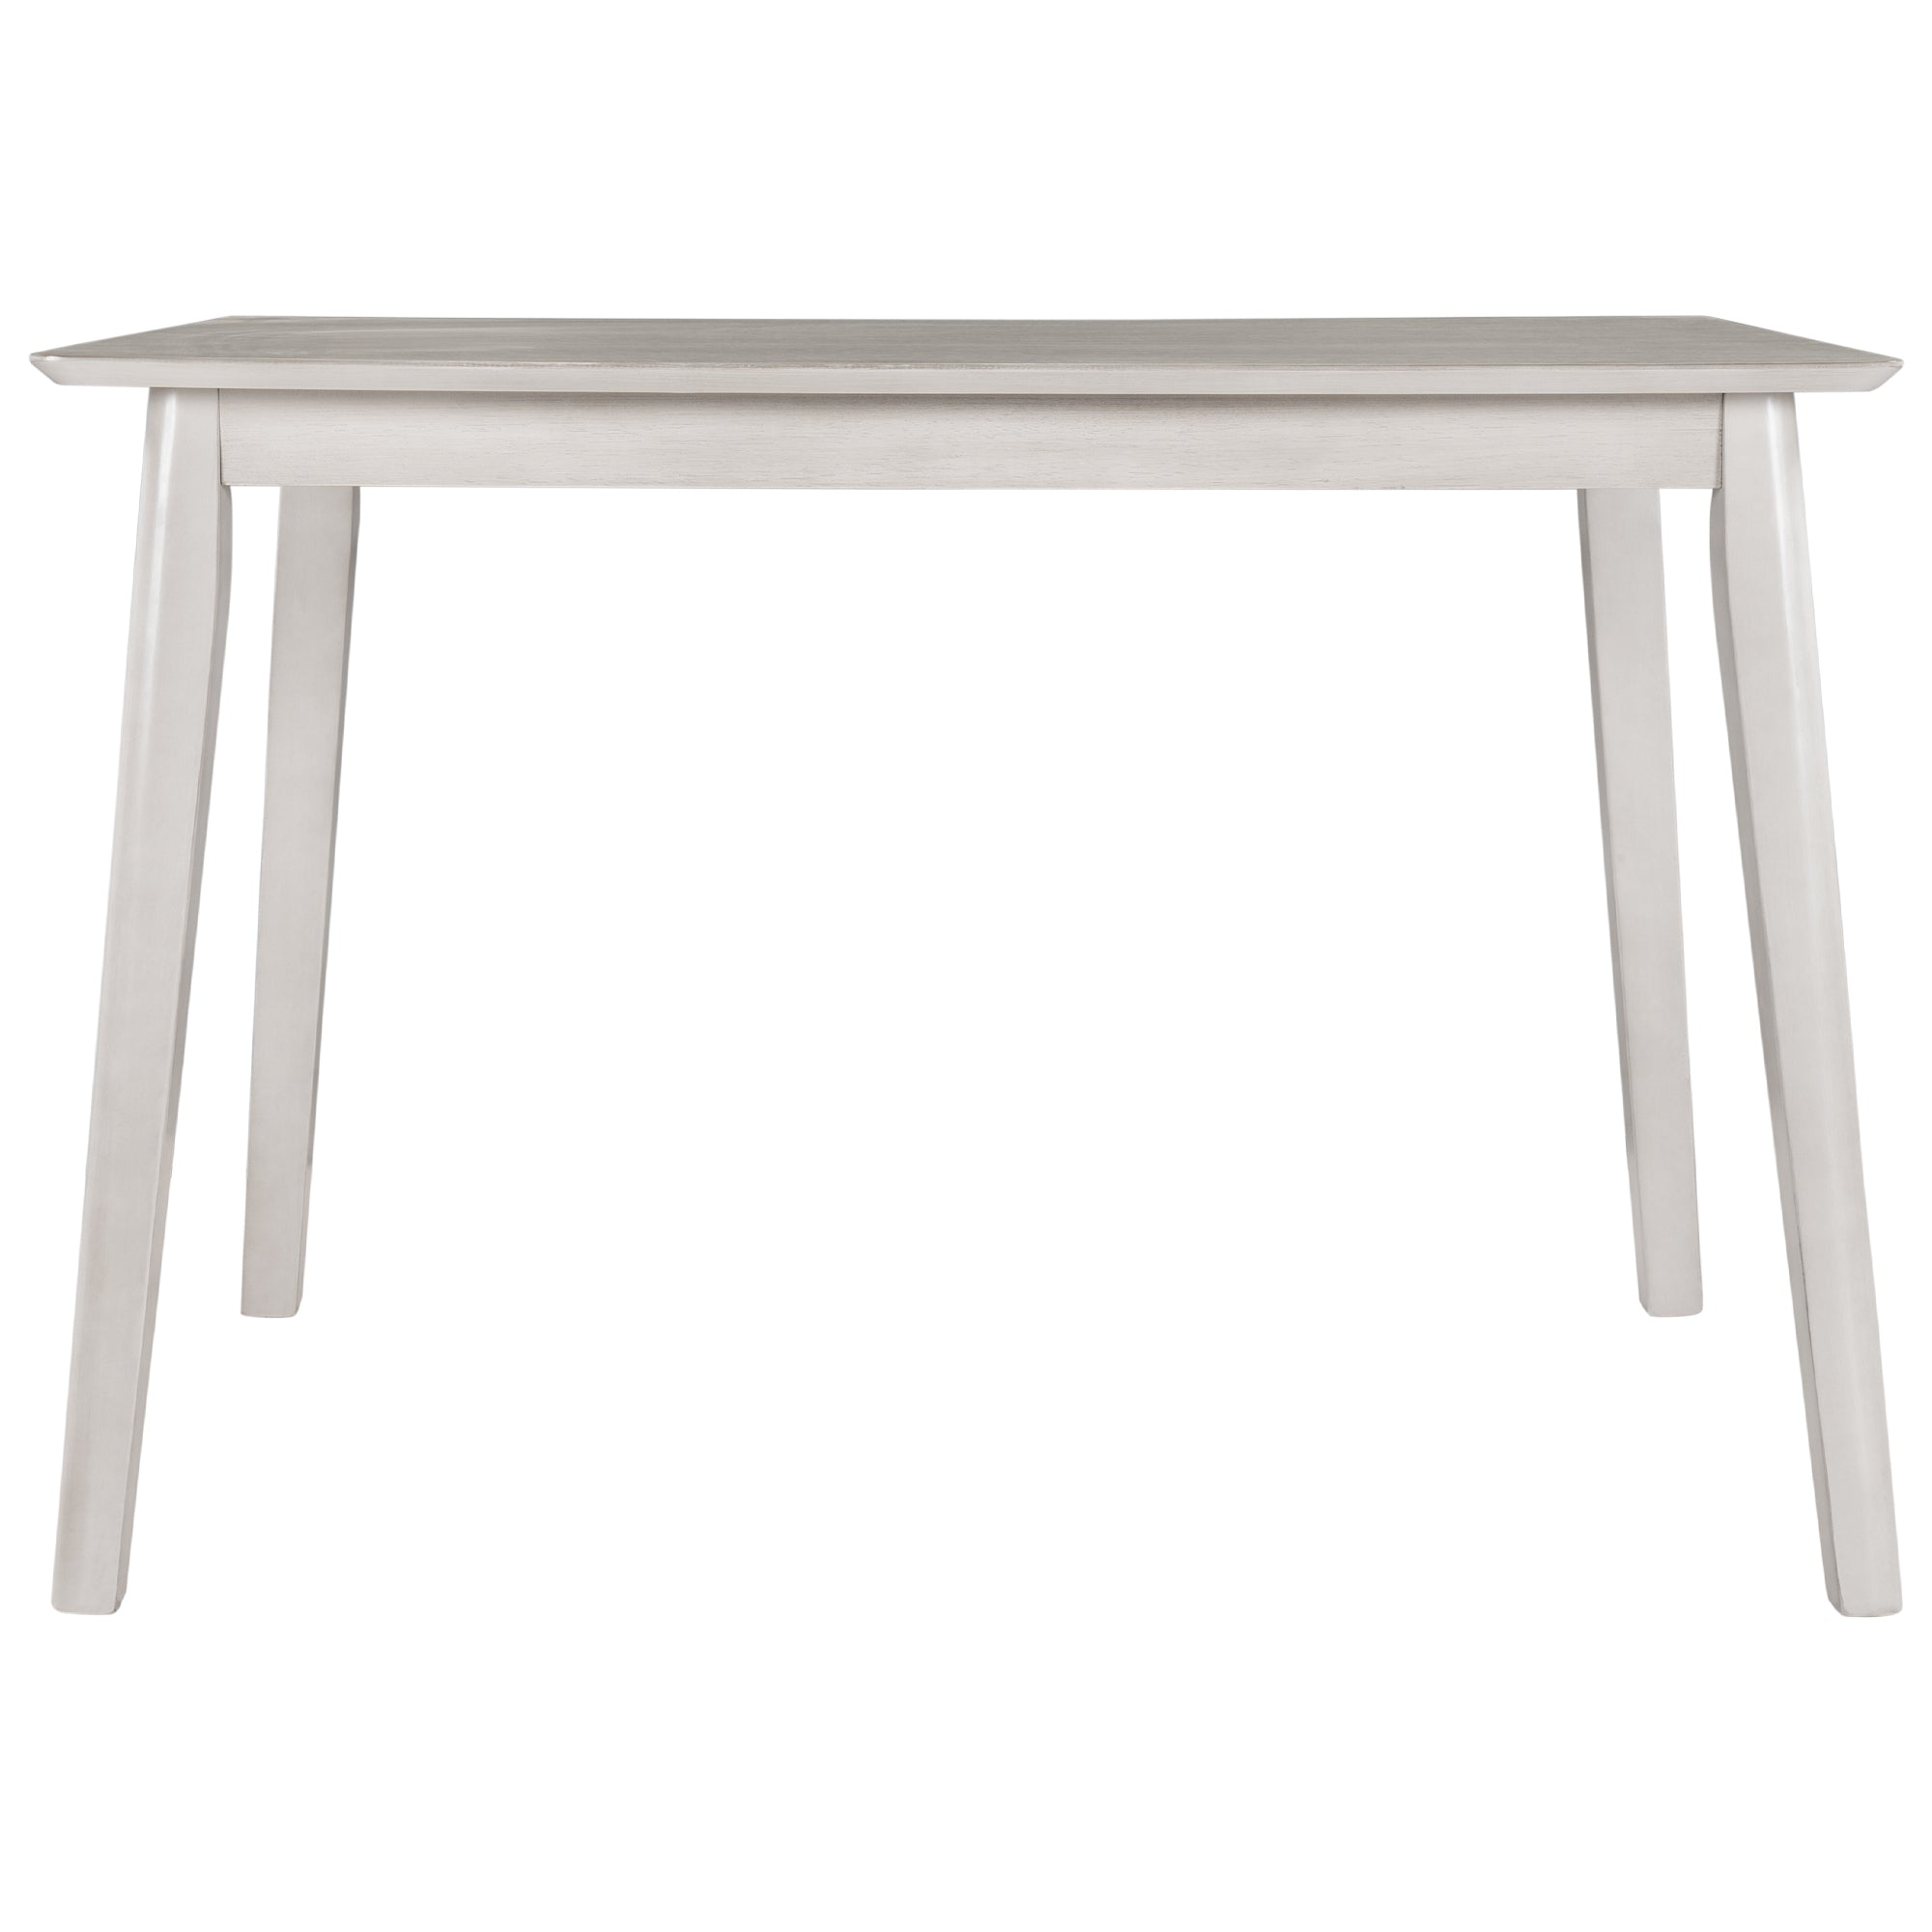 Farmhouse Rustic Wood Kitchen Dining Table, Light Gray+White